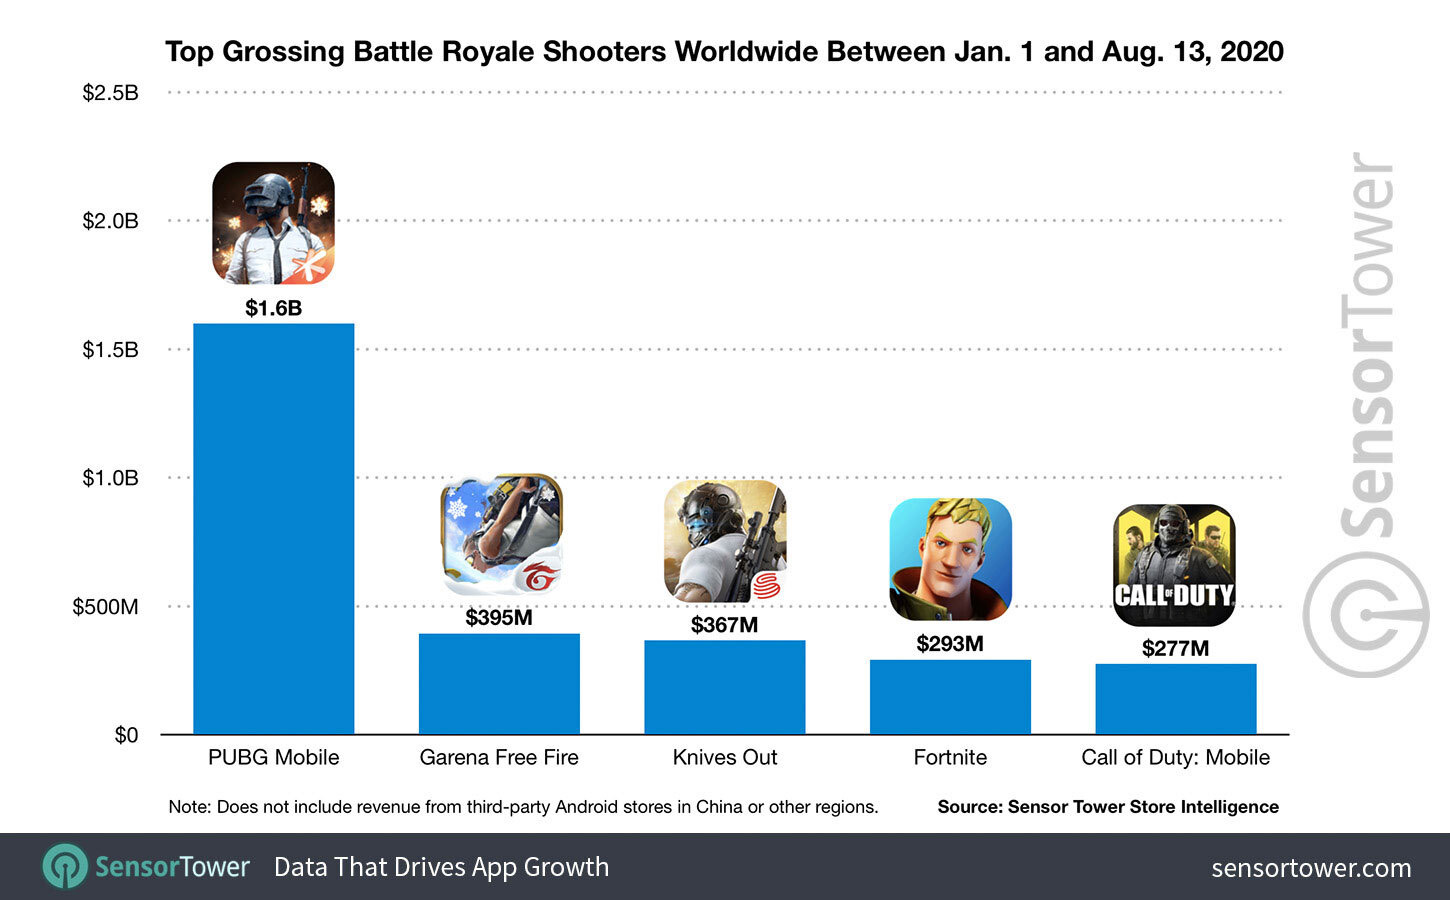 The Top Global Battle Royale Shooters by Revenue in 2020